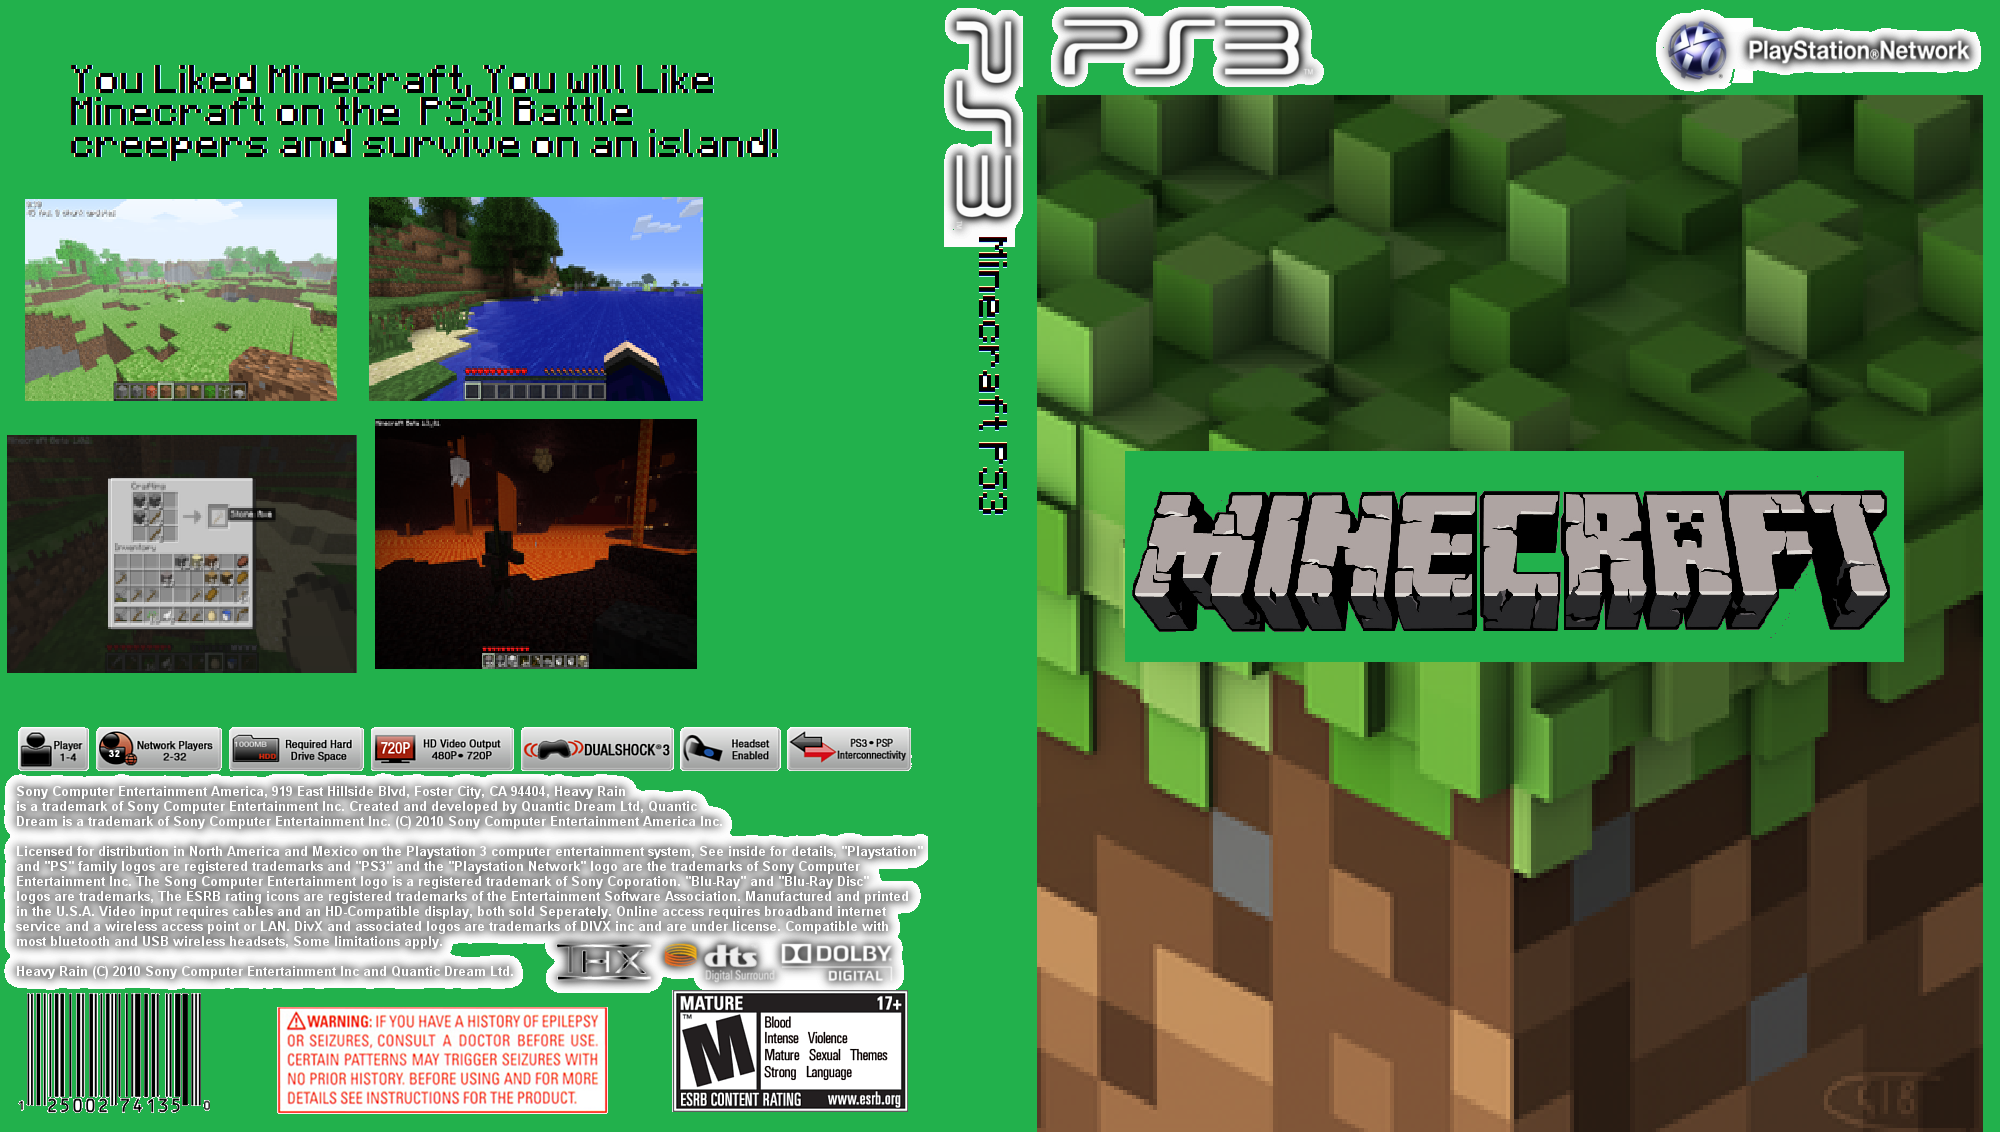 is minecrafy on ps3 1080p or 720p